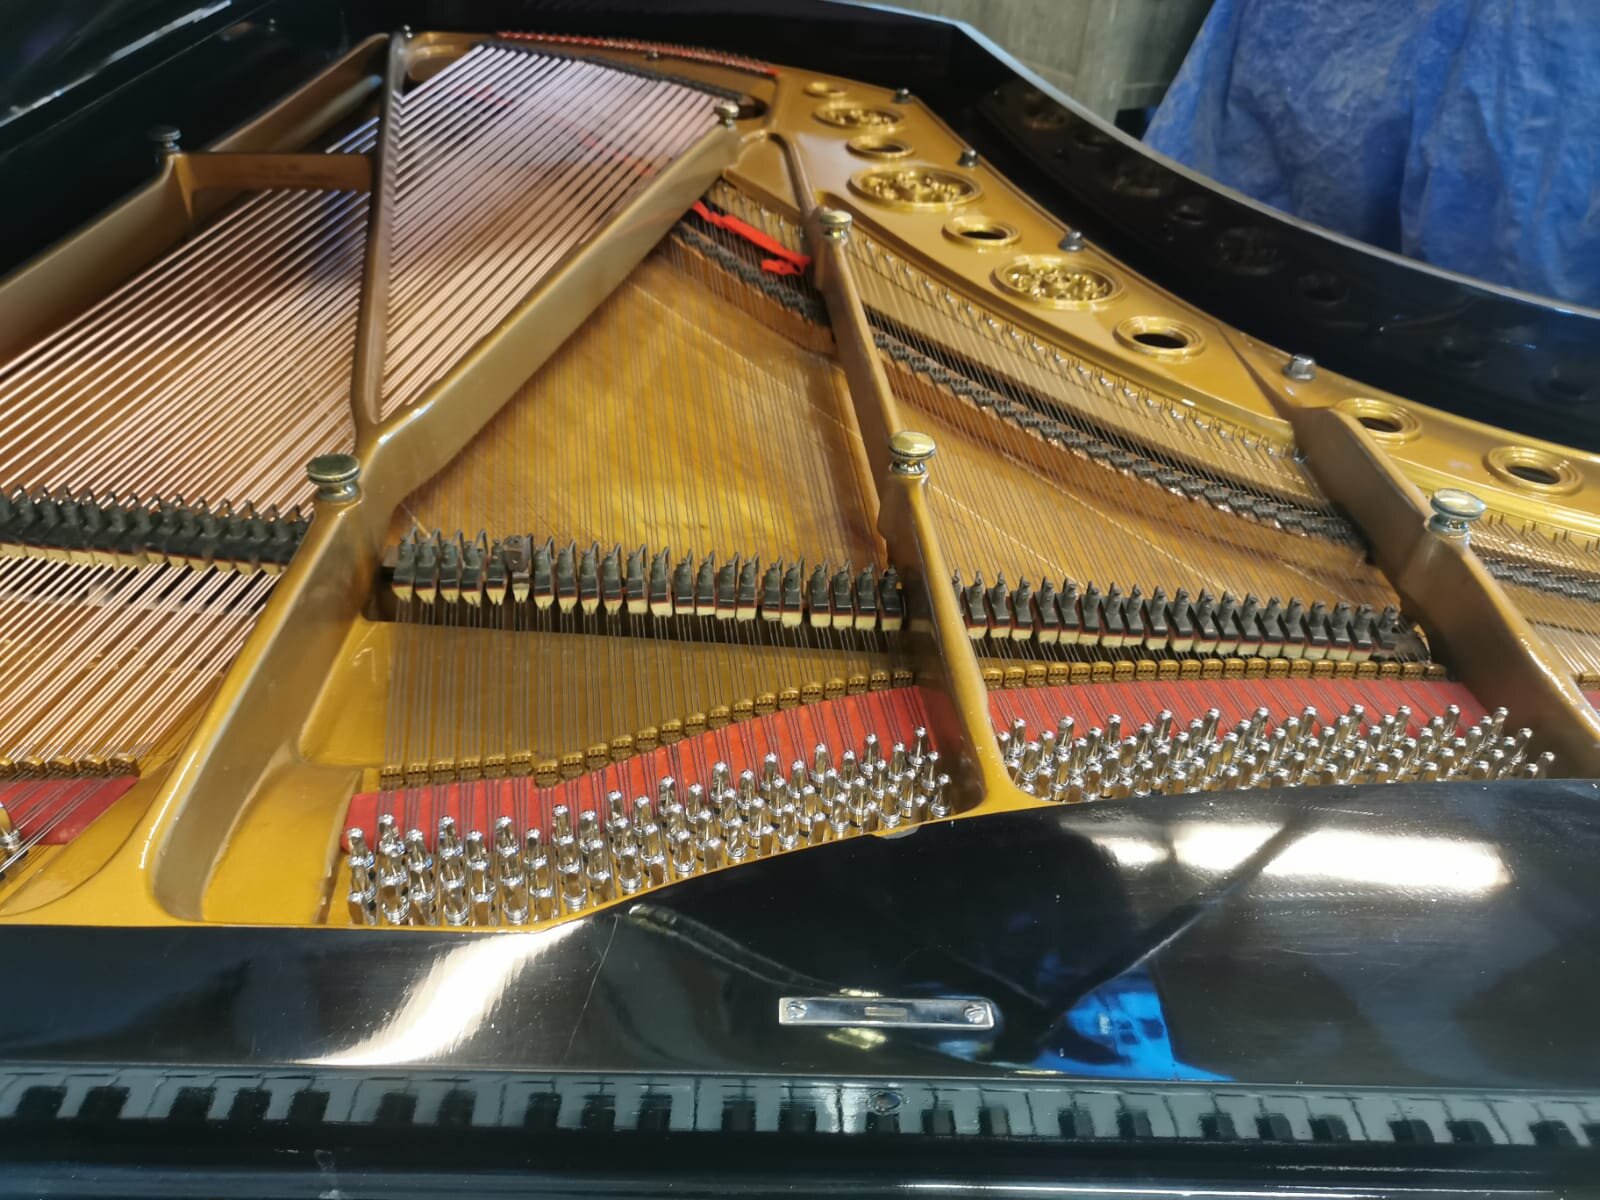 Chickering piano for sale8.jpeg